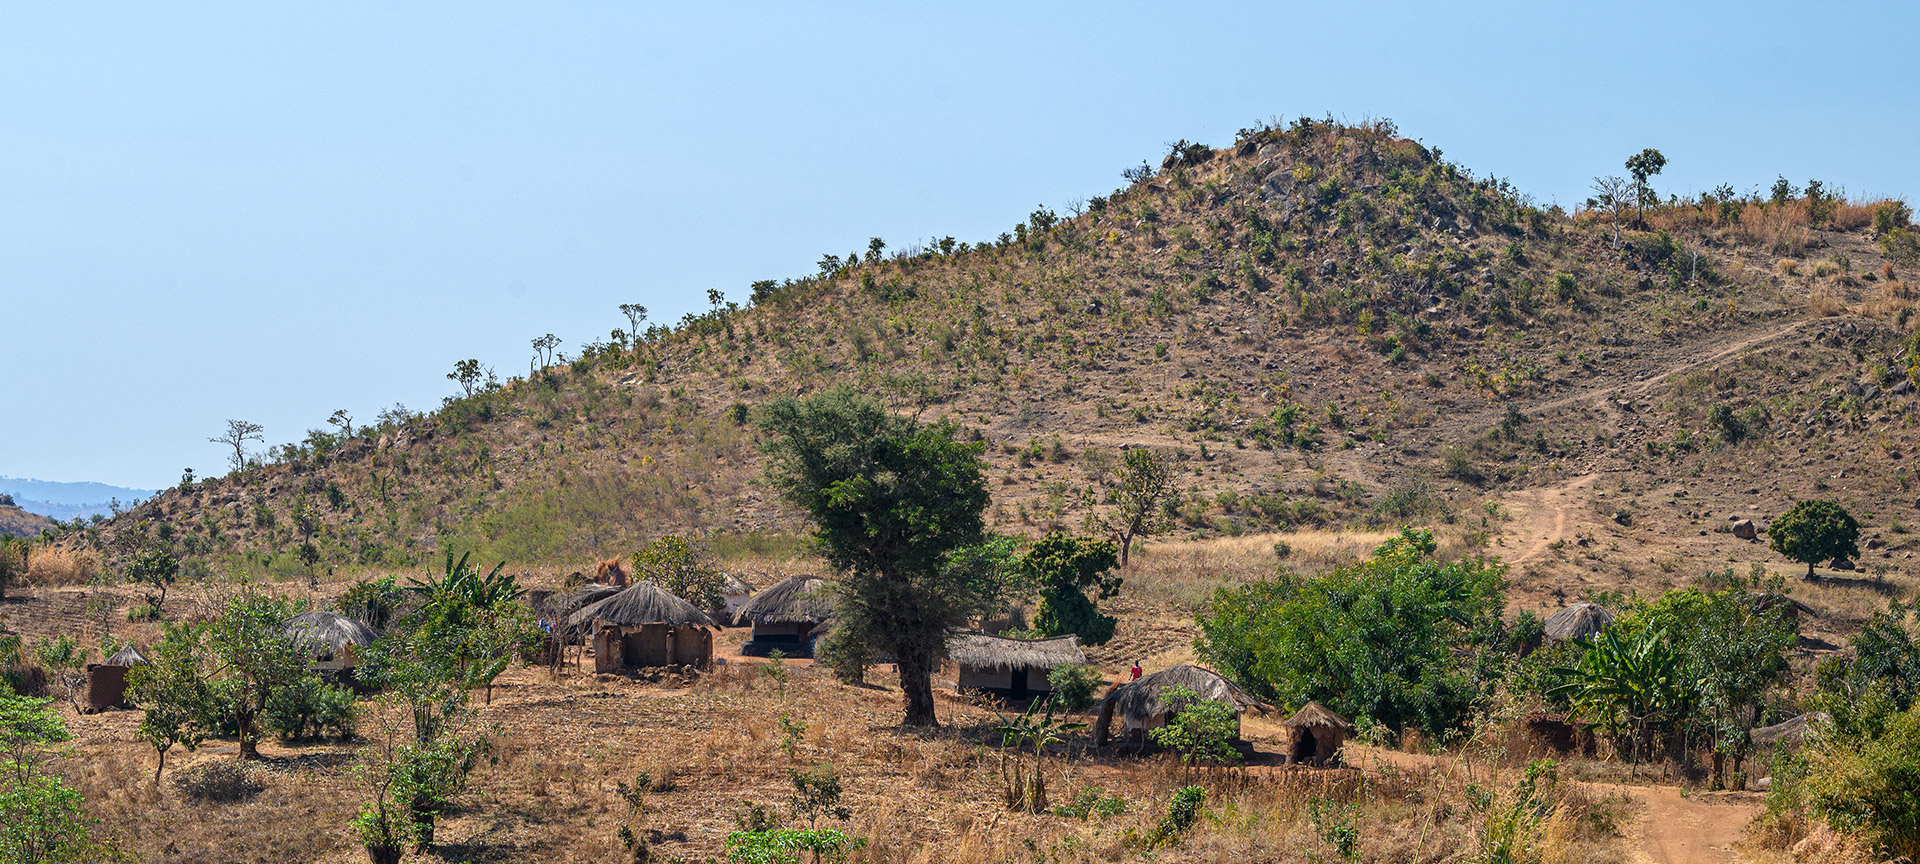 A hilltop rural area with a few trees and cabins made of straw. 